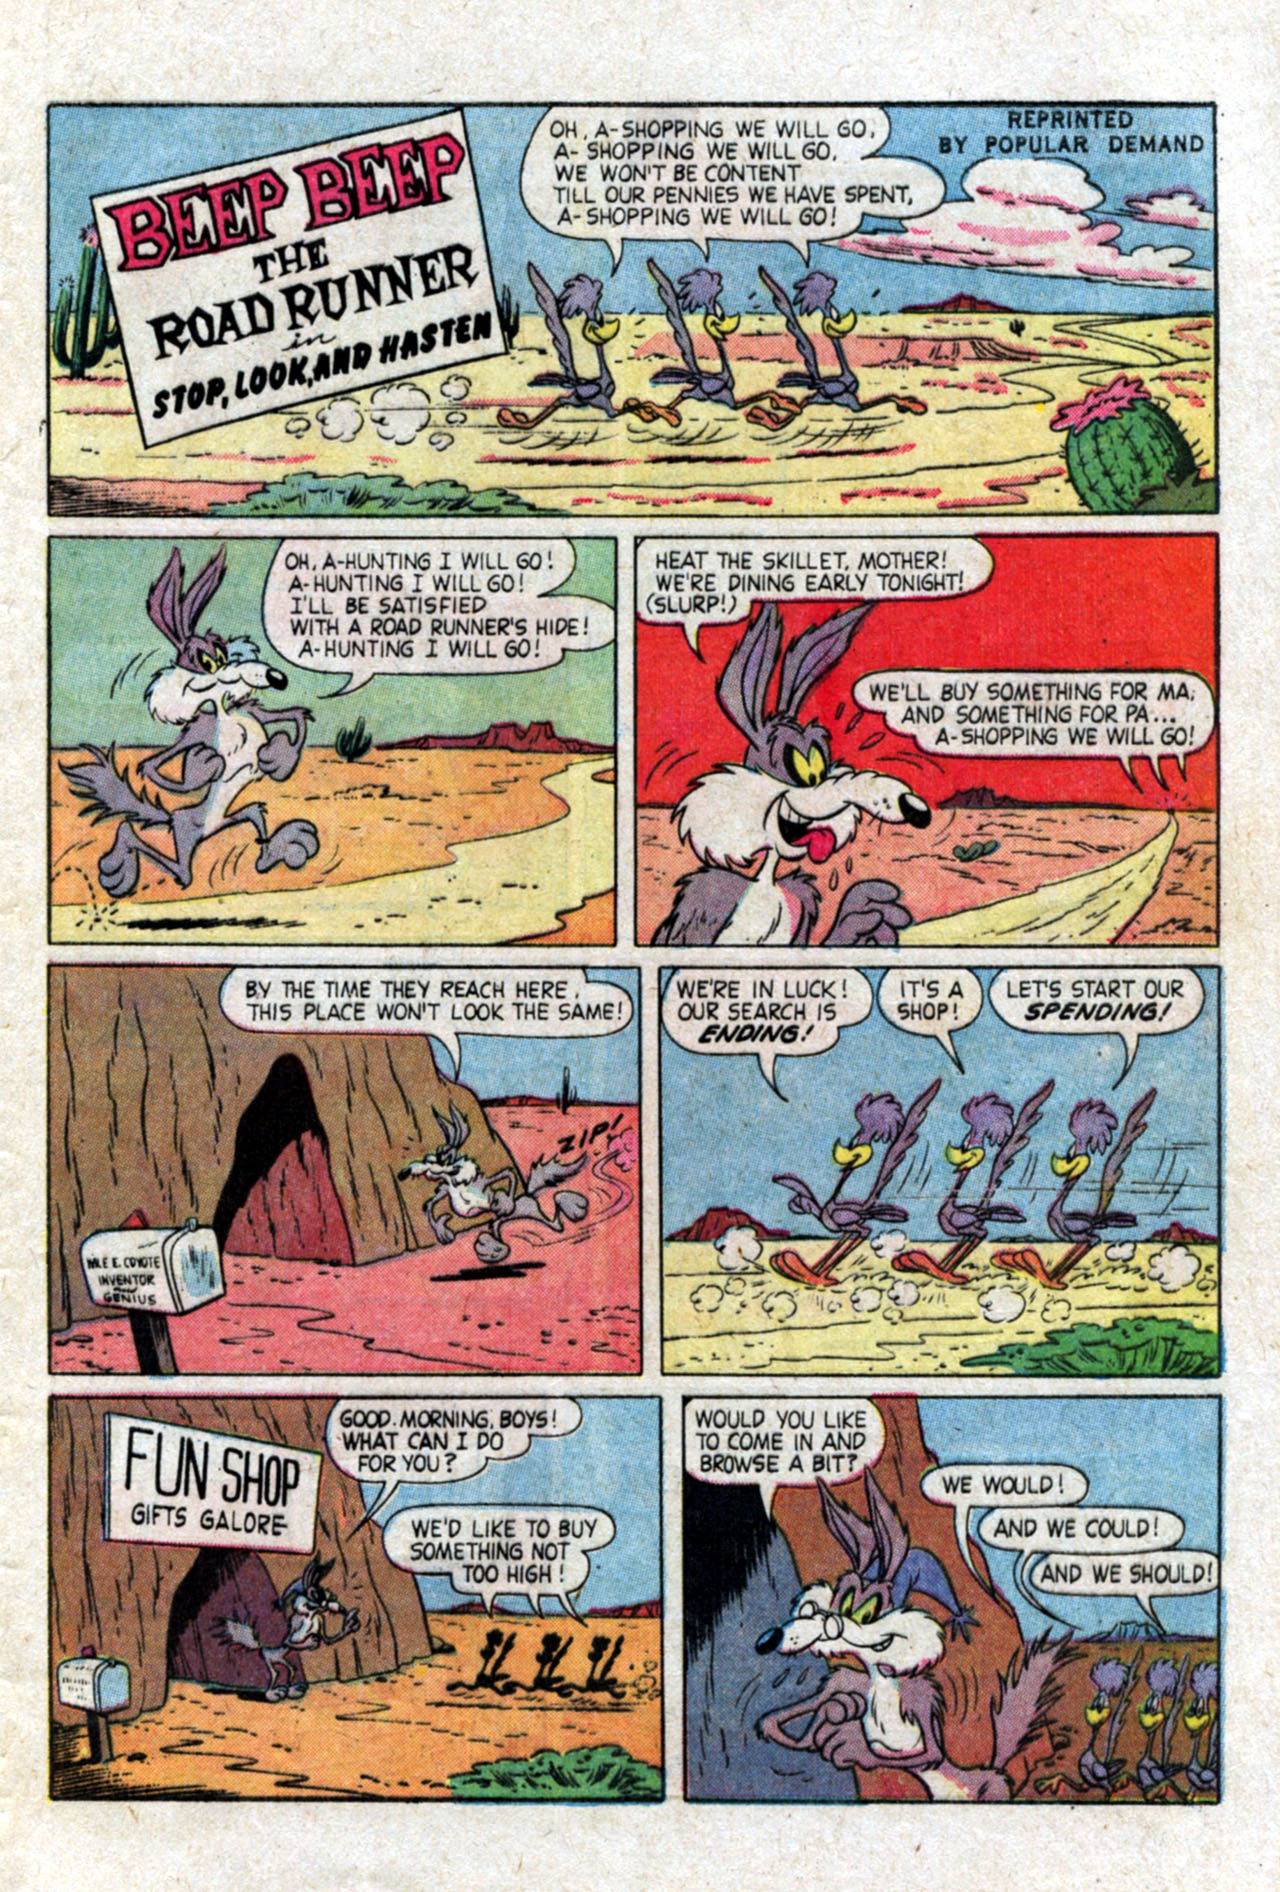 Read online Beep Beep The Road Runner comic -  Issue #18 - 9